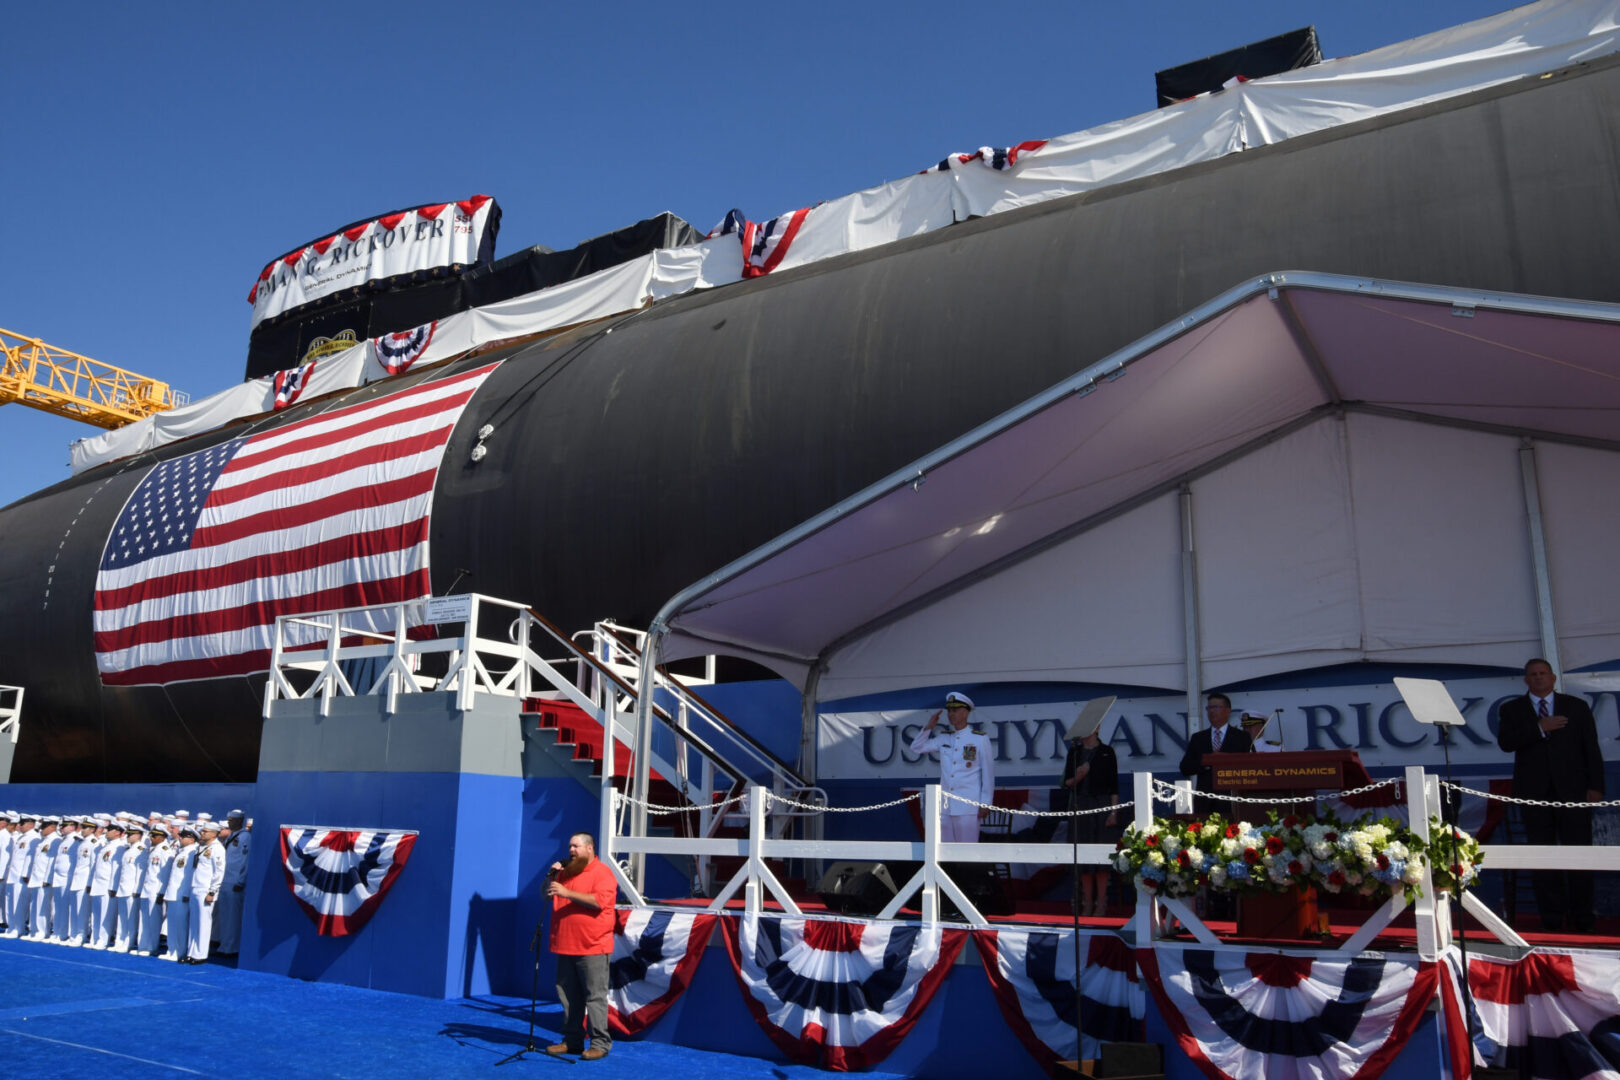 210731-N-GR655-043 GROTON, Conn. (July 31, 2021) – Scott Lacaillade, a shipyard employee, sings the national anthem in front of the pre-commissioning unit (PCU) Hyman G. Rickover (SSN 795) during a christening ceremony at General Dynamics Electric Boat shipyard facility in Groton, Conn., July 31, 2021. Rickover and crew will operate under Submarine Squadron (SUBRON) FOUR whose primary mission is to provide attack submarines that are ready, willing, and able to meet the unique challenges of undersea combat and deployed operations in unforgiving environments across the globe. (U.S. Navy photo by Chief Petty Officer Joshua Karsten/RELEASED)